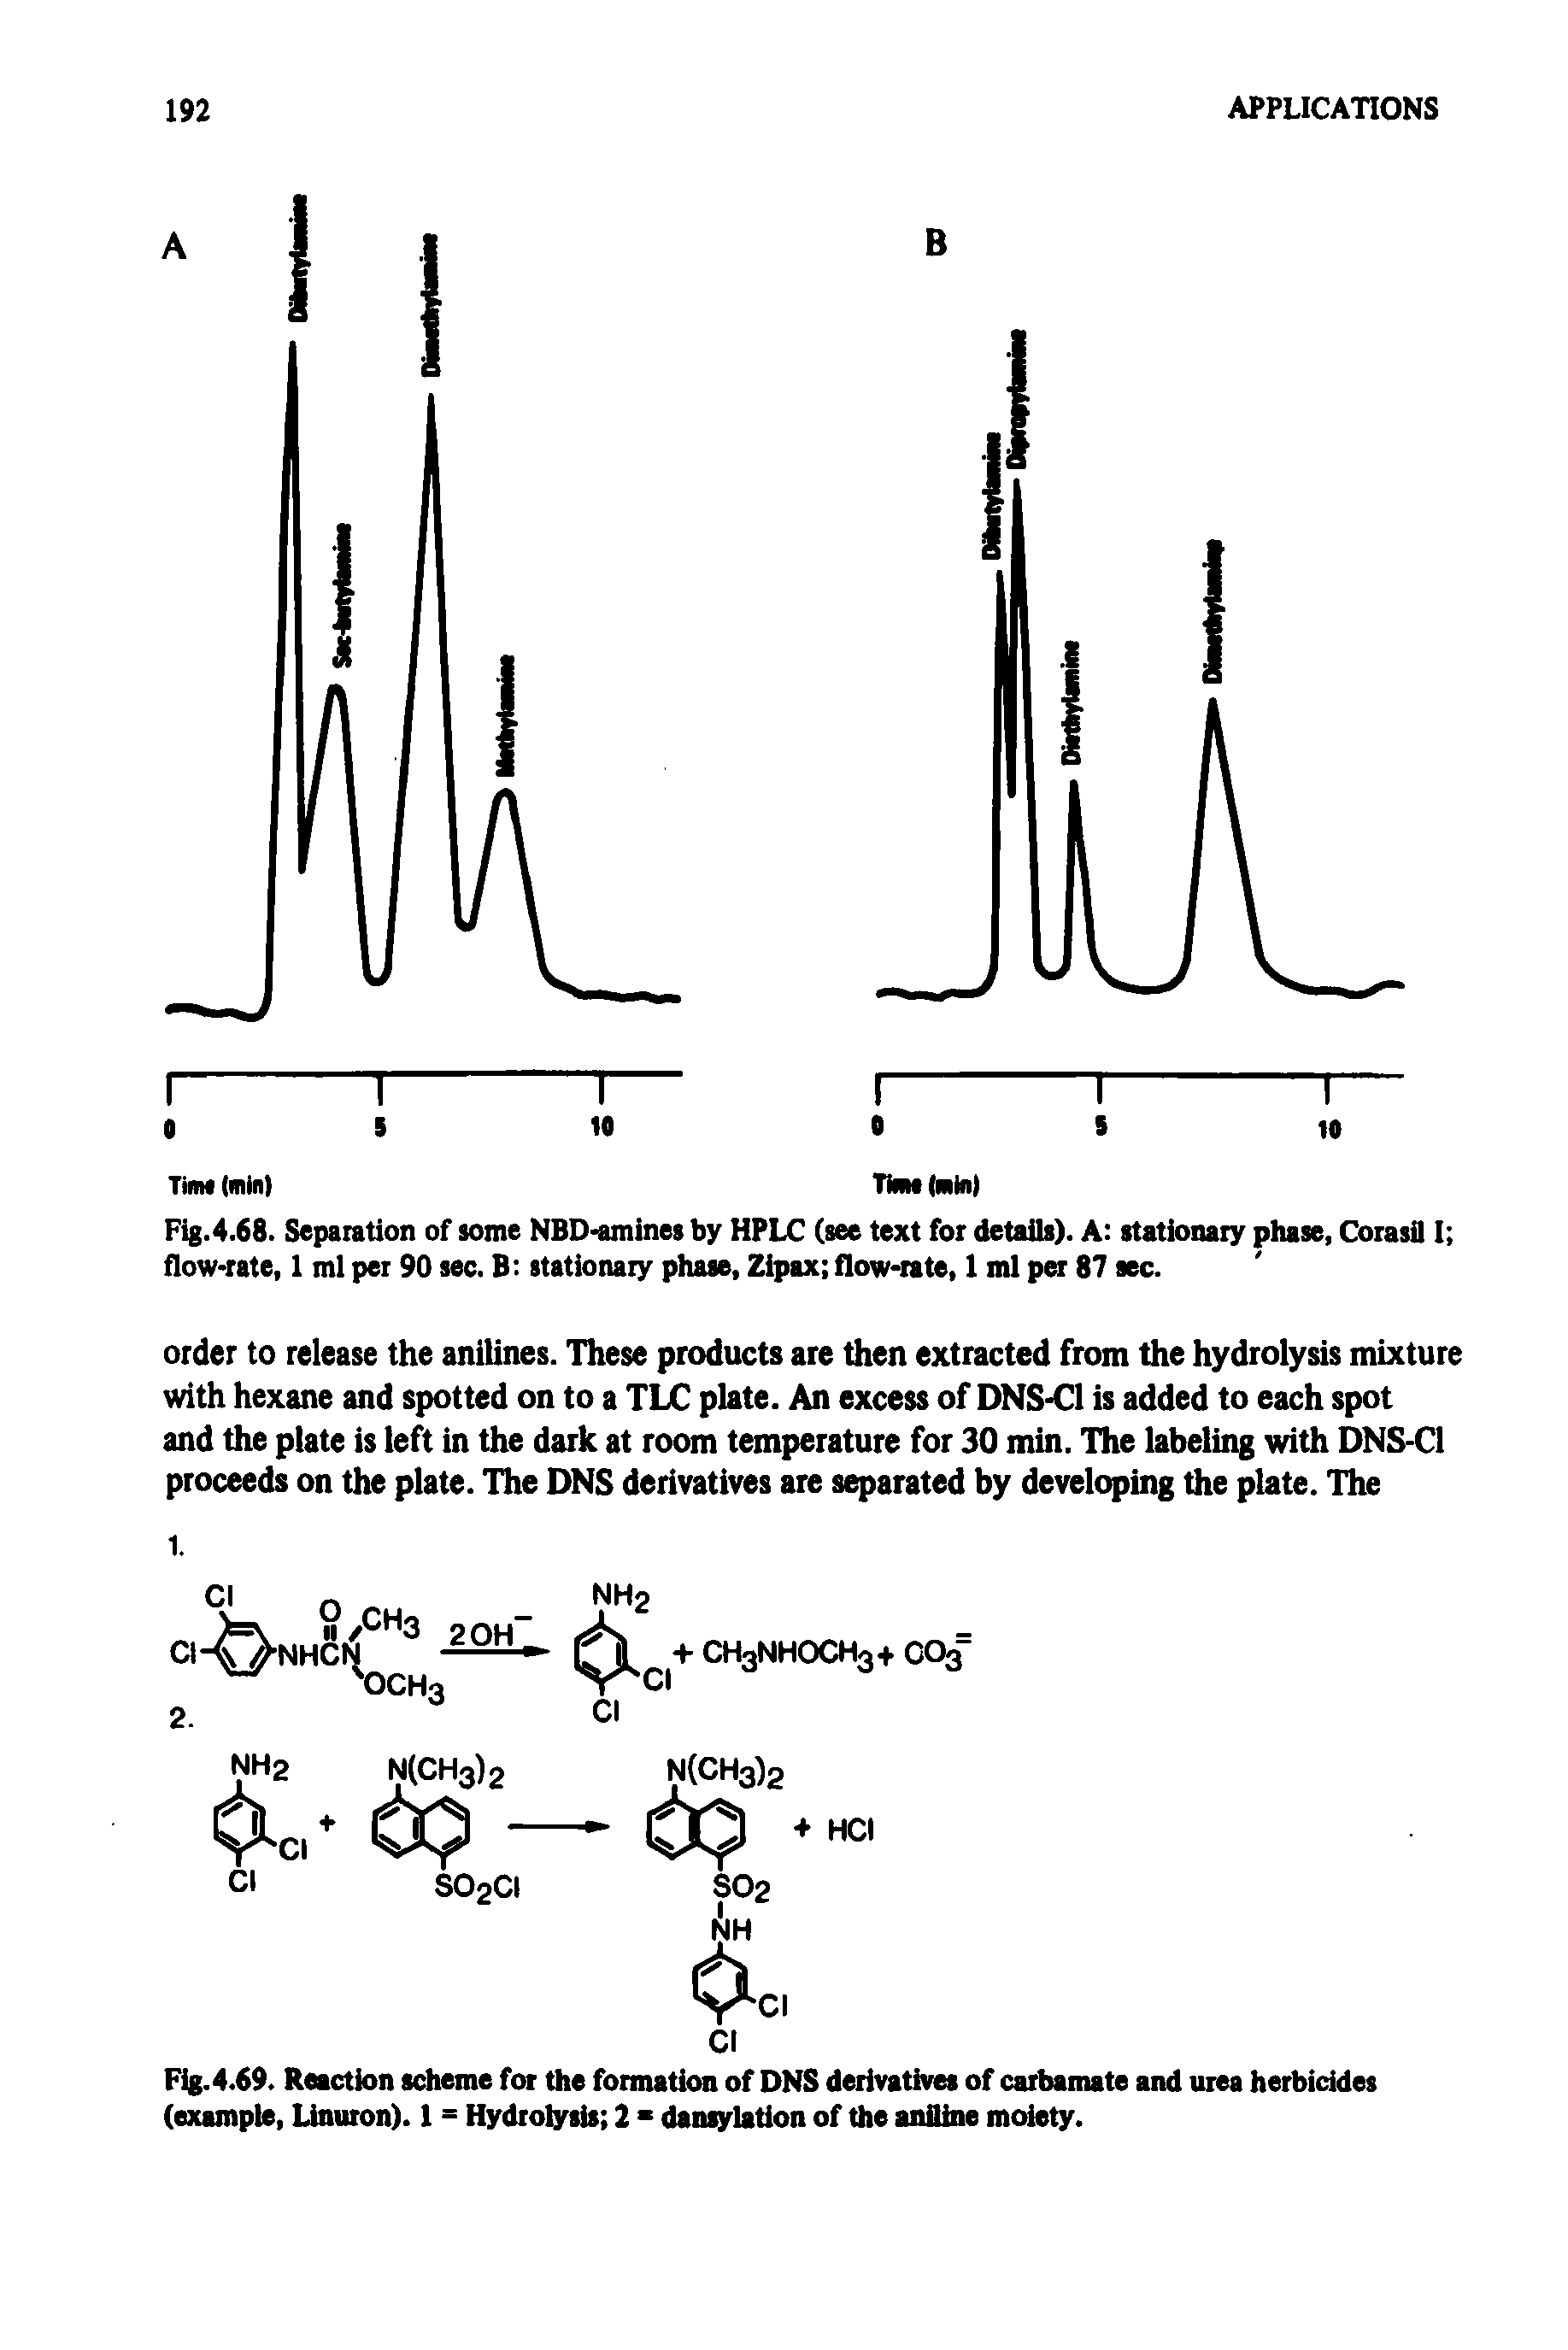 Fig. 4.69. Reaction scheme for the formation of DNS derivatives of carbamate and urea herbicides (example, Linuron). 1 = Hydrolysis 2 dansylation of the aniline moiety.